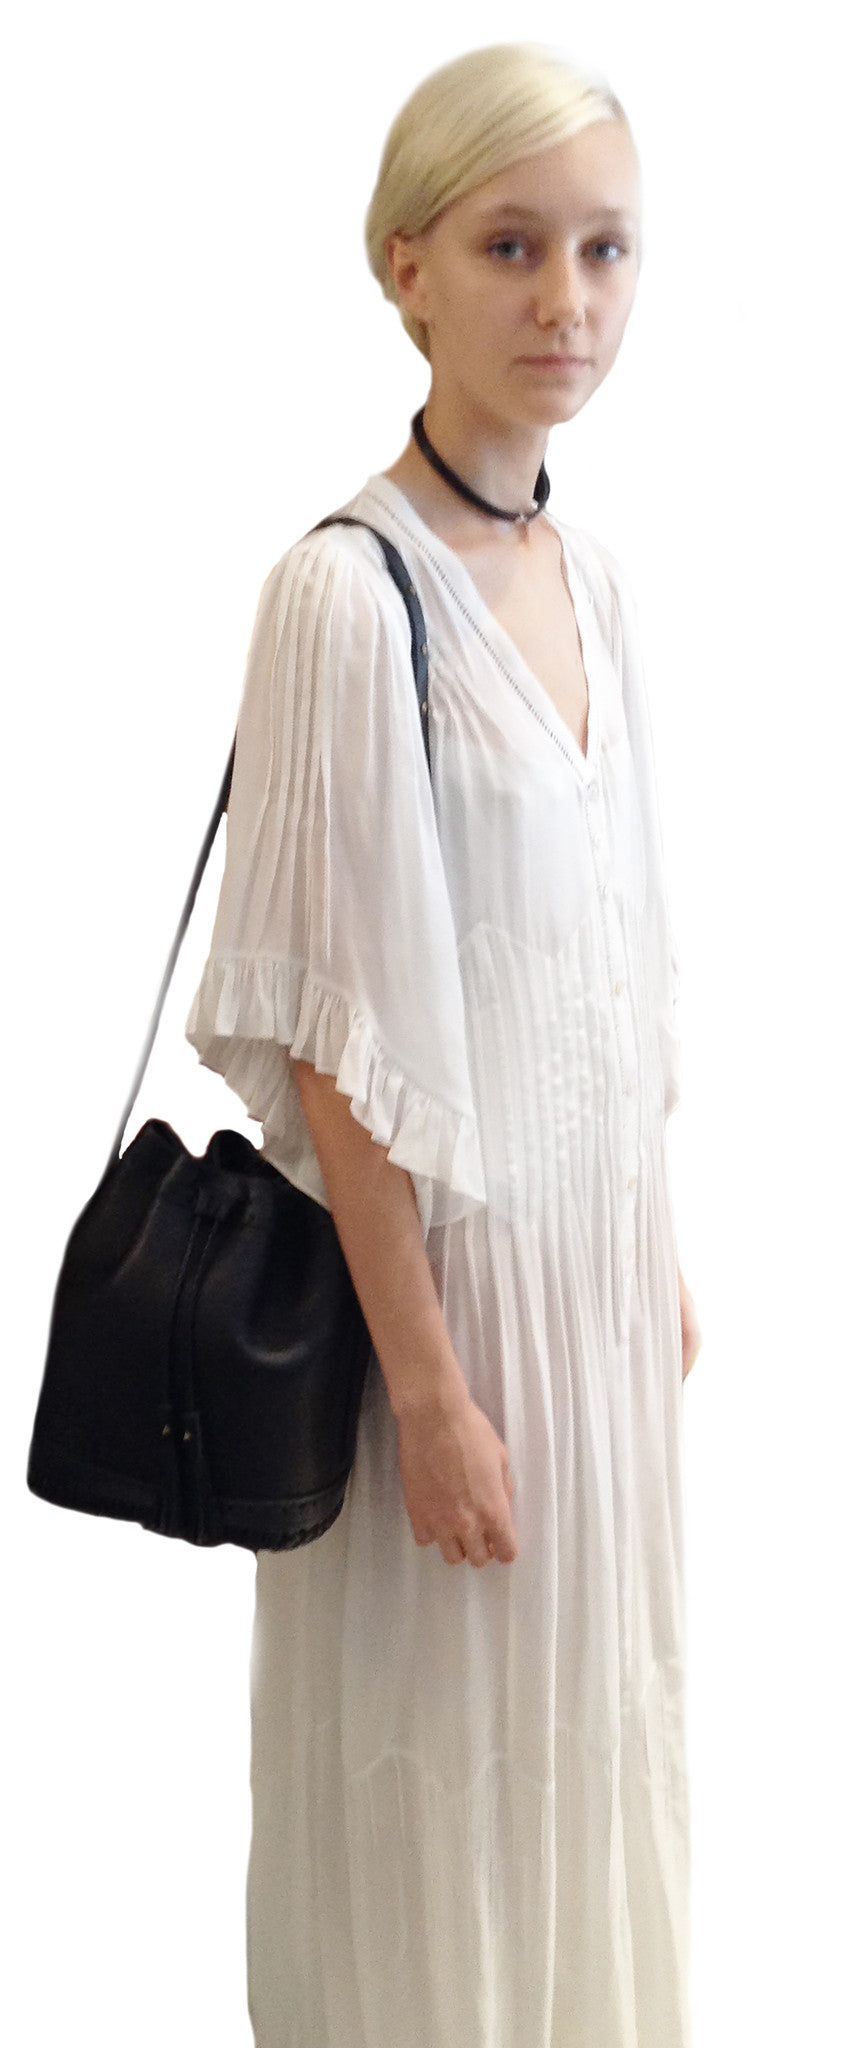 Juliette Fazekas IMG Model SS15 Space Master Fashion Show Leather Small Carriage Bag Wendy Nichol Handbag Purse Designer Handmade in NYC New York City Bucket Bag Drawstring Draw string Pouch small fringe tassel Adjustable Durable Strap High Quality Leather